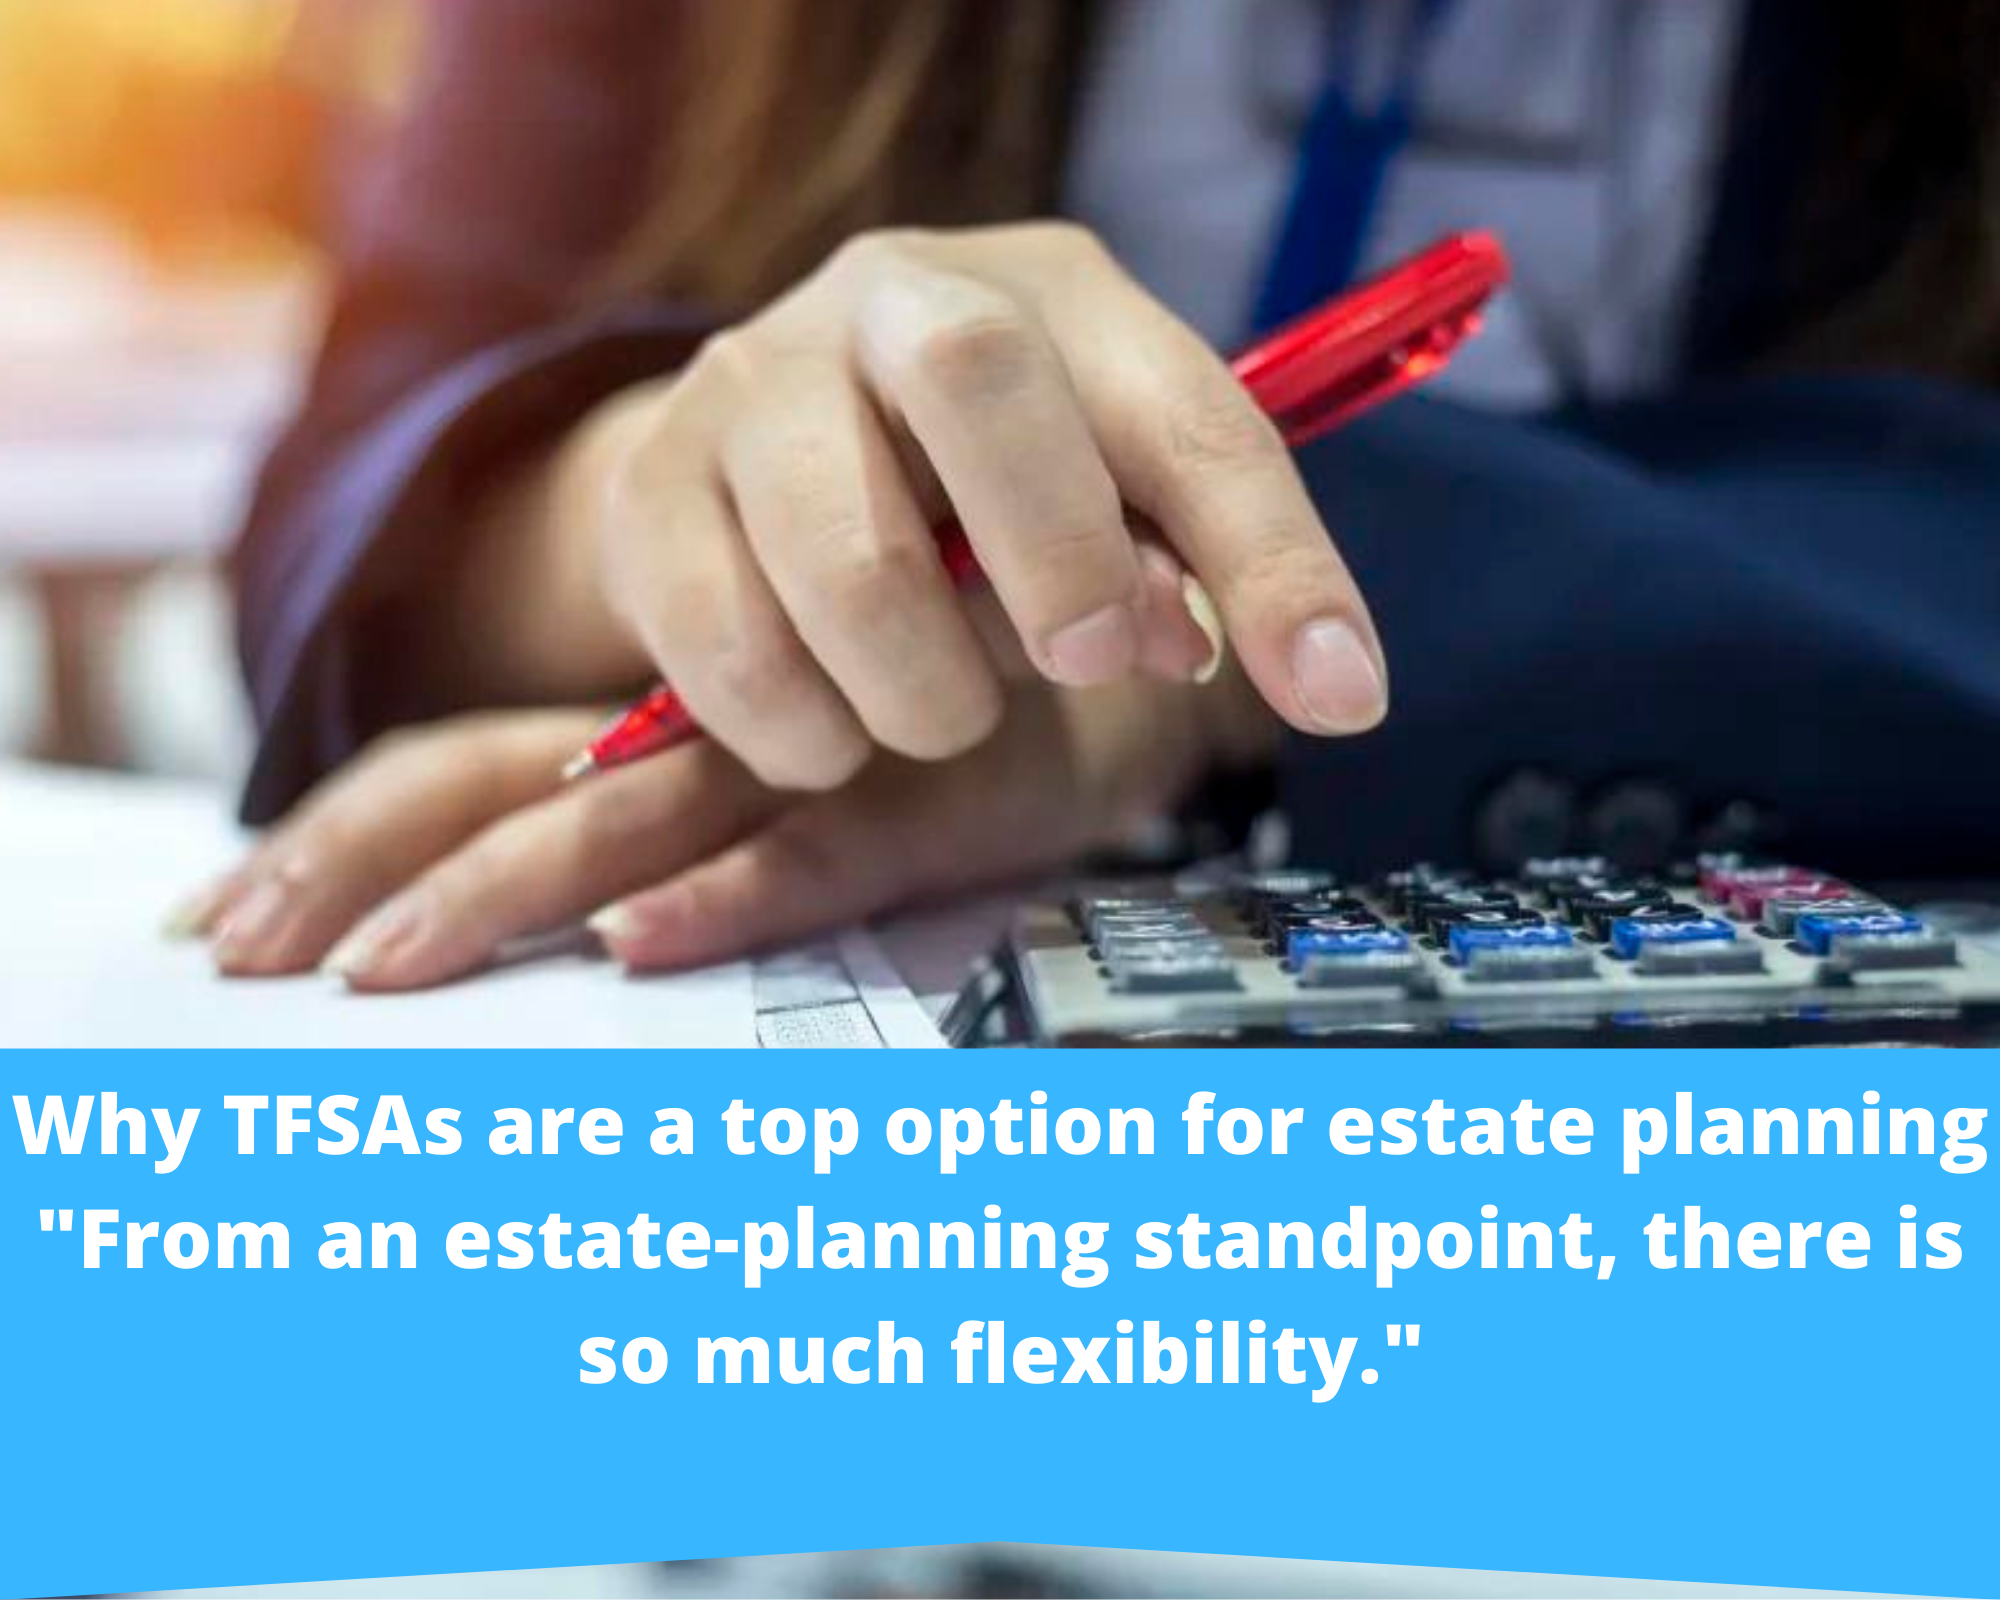 You are currently viewing There is a lot of flexibility when it comes to estate planning, which is why TFSAs are a favorite choice.